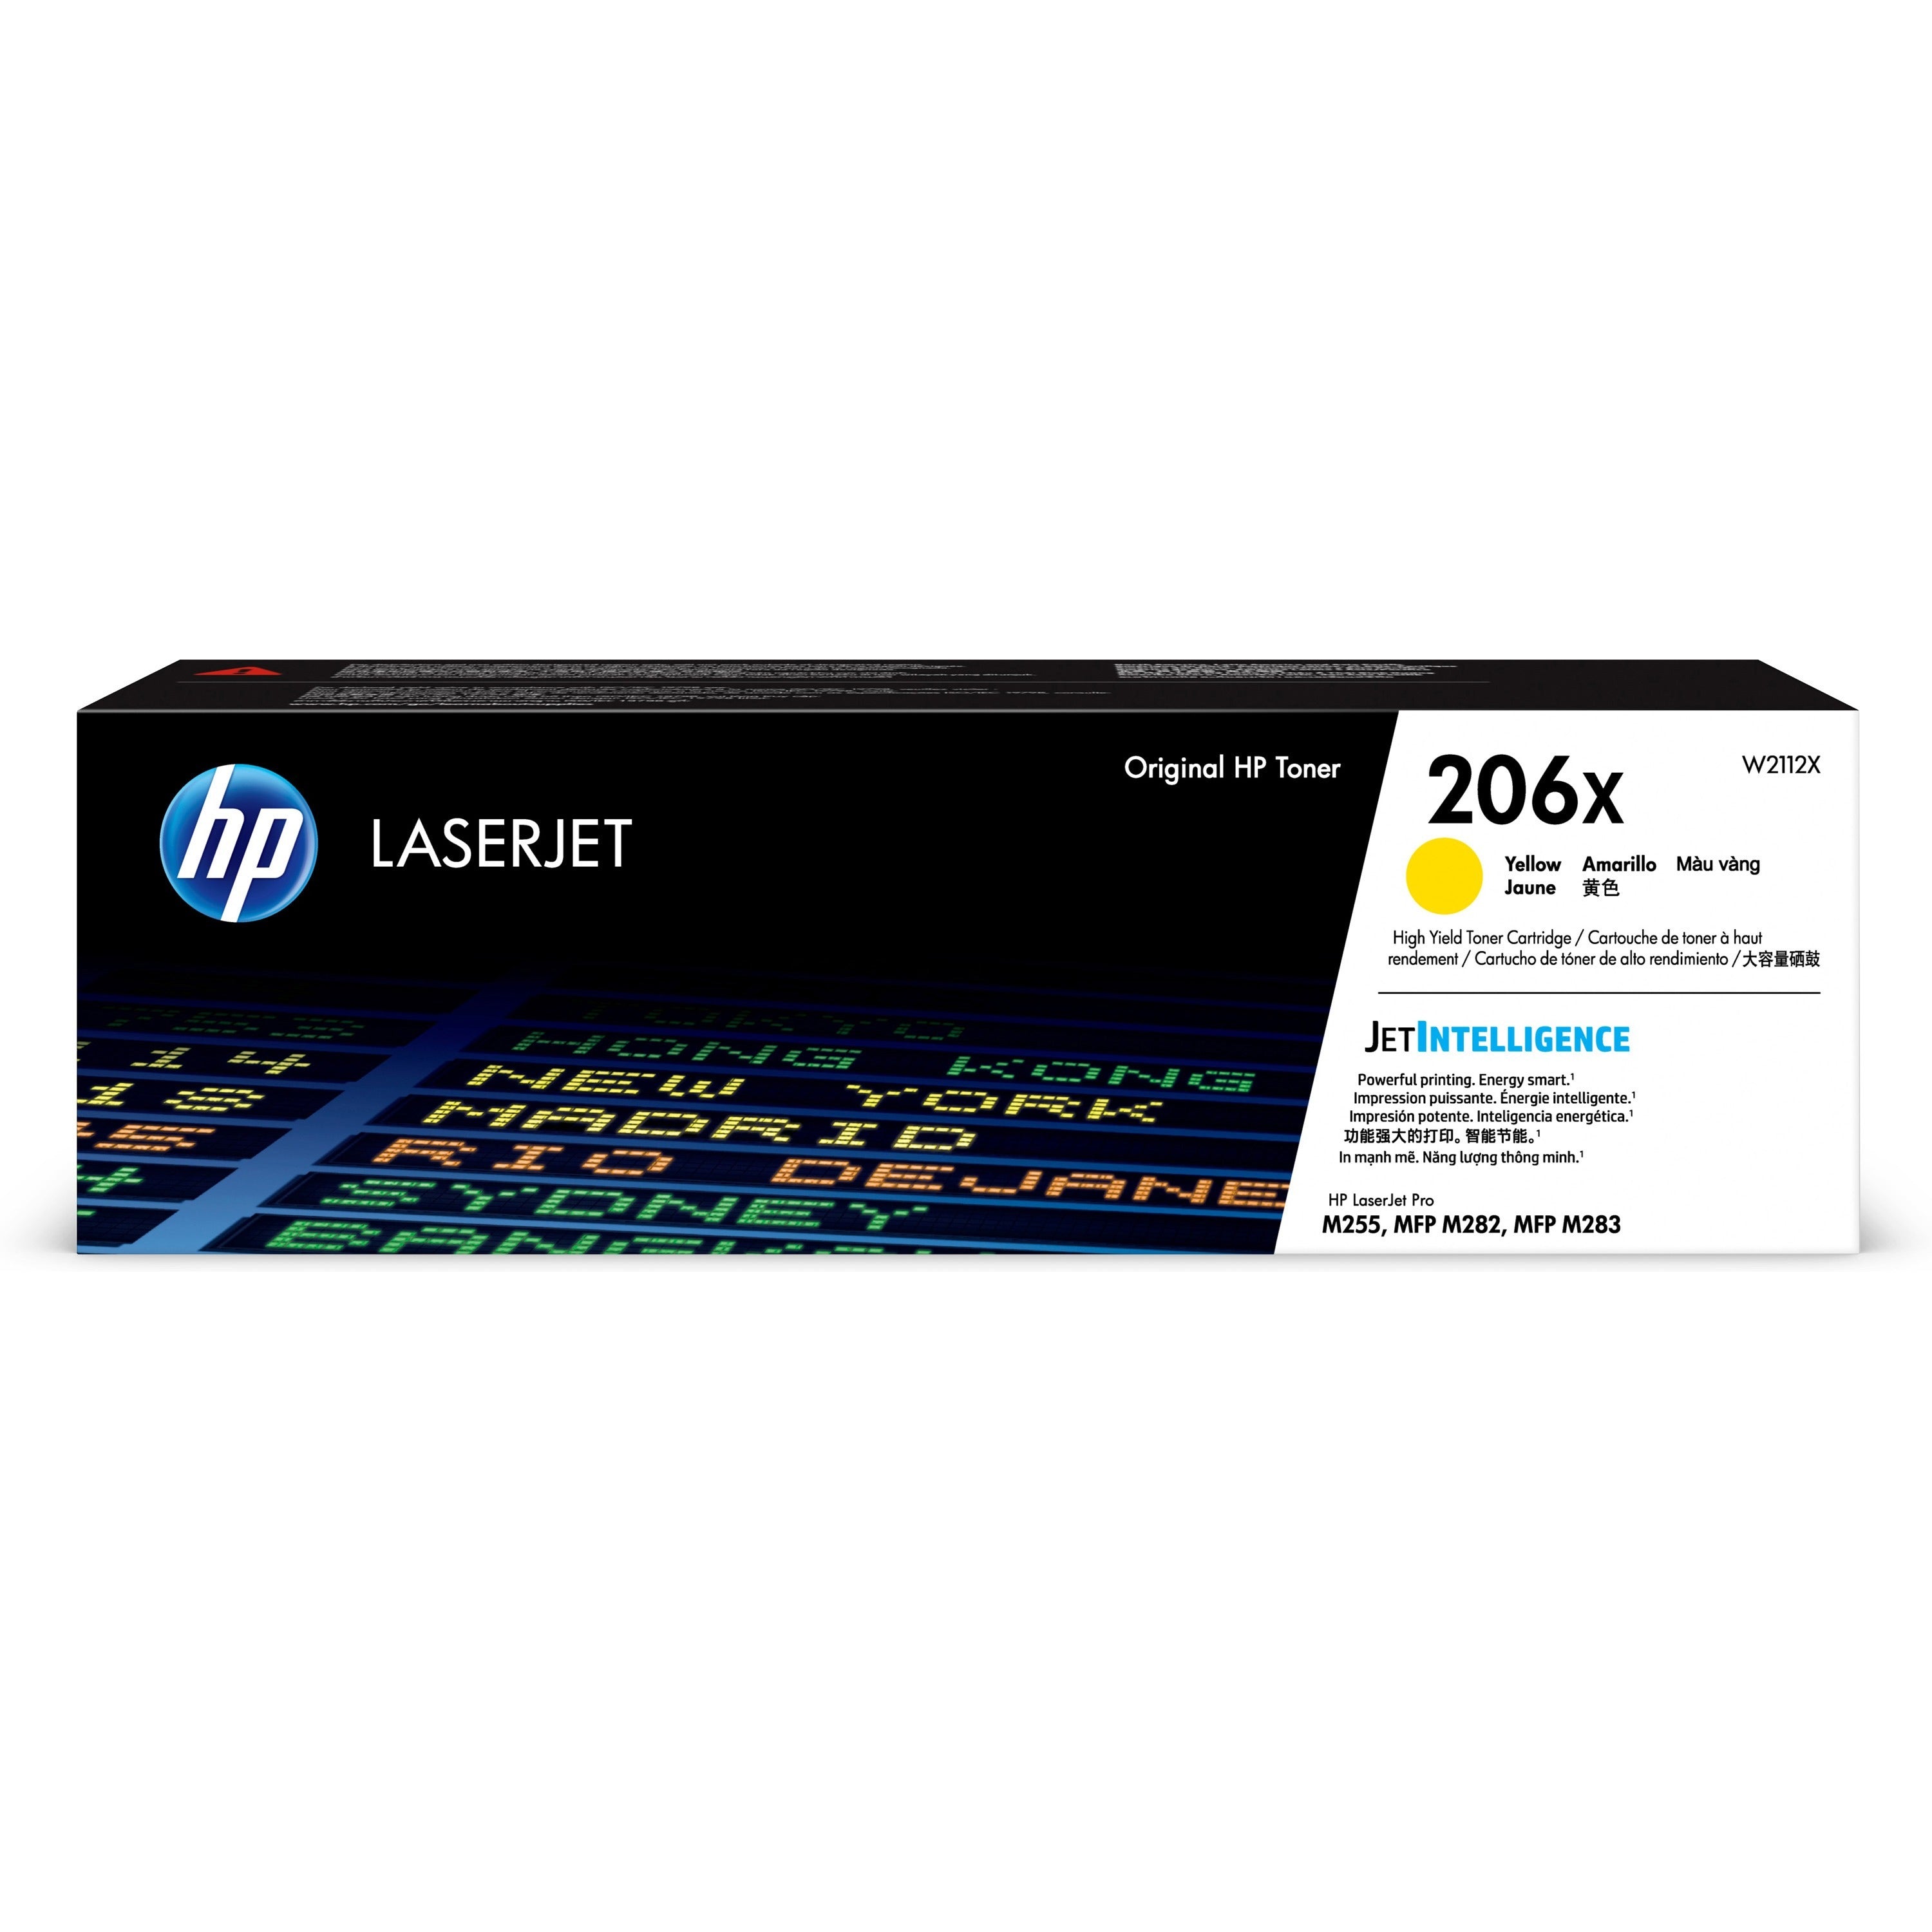 hp-206x-original-high-yield-laser-toner-cartridge-yellow-1-each-2450-pages_heww2112x - 1